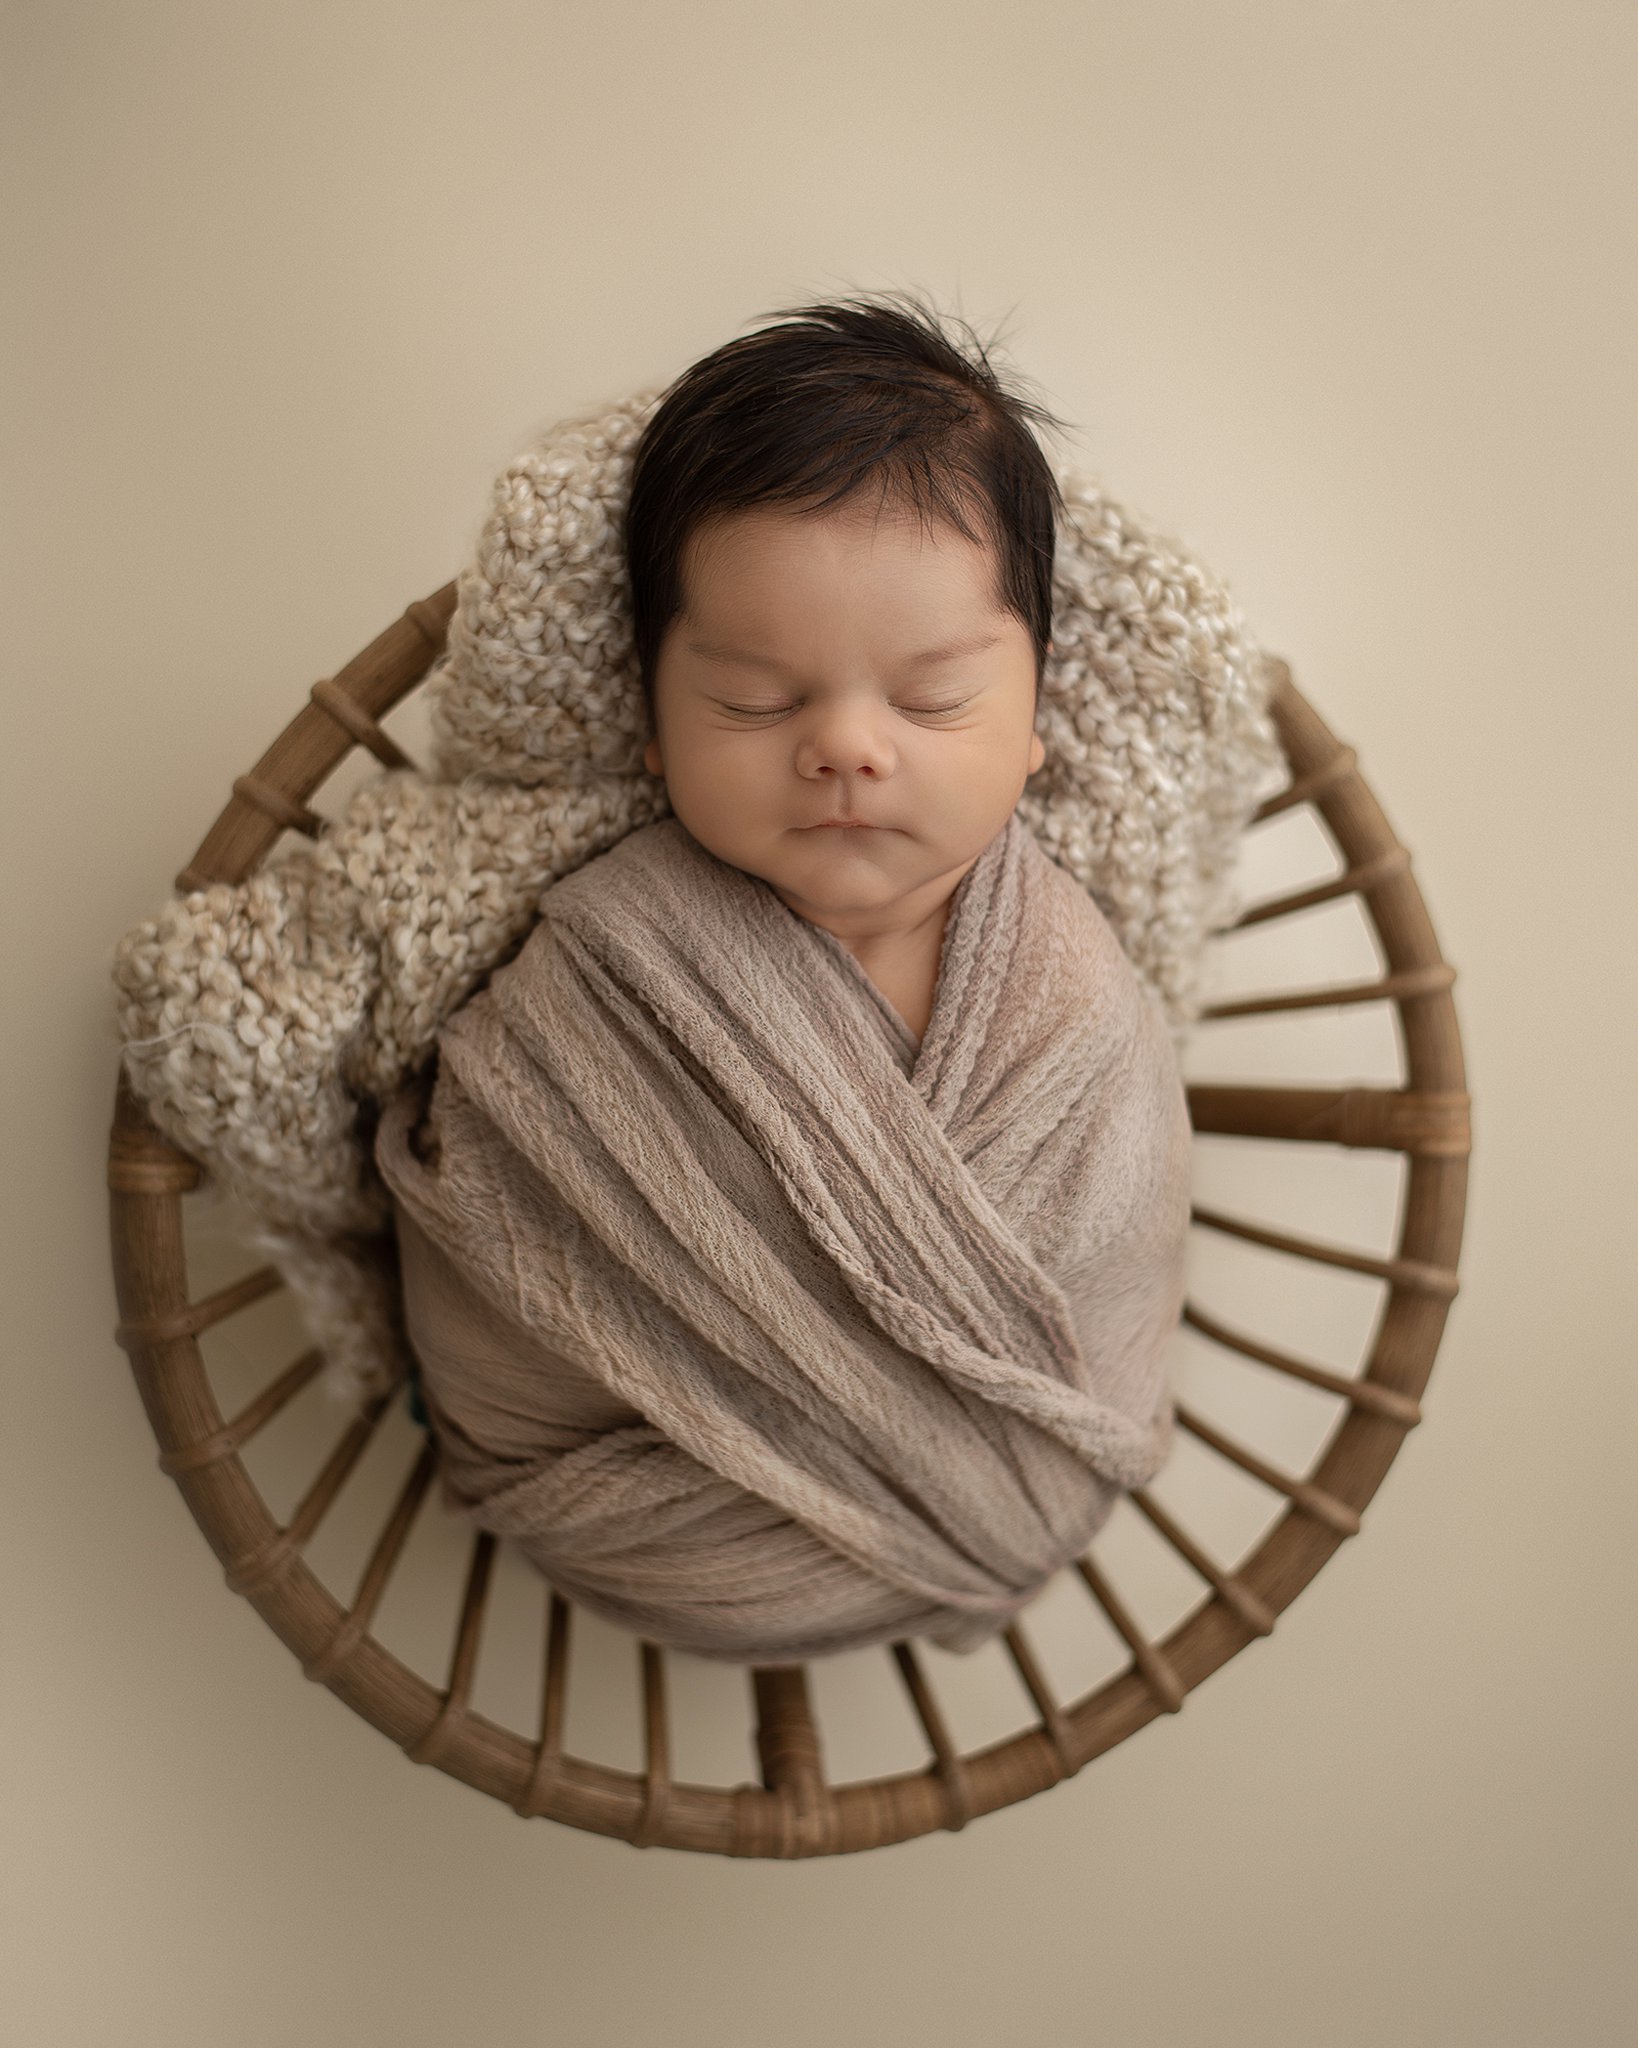 A newborn baby sleeps in a brown swaddle in a wicker basket town and country pediatricians